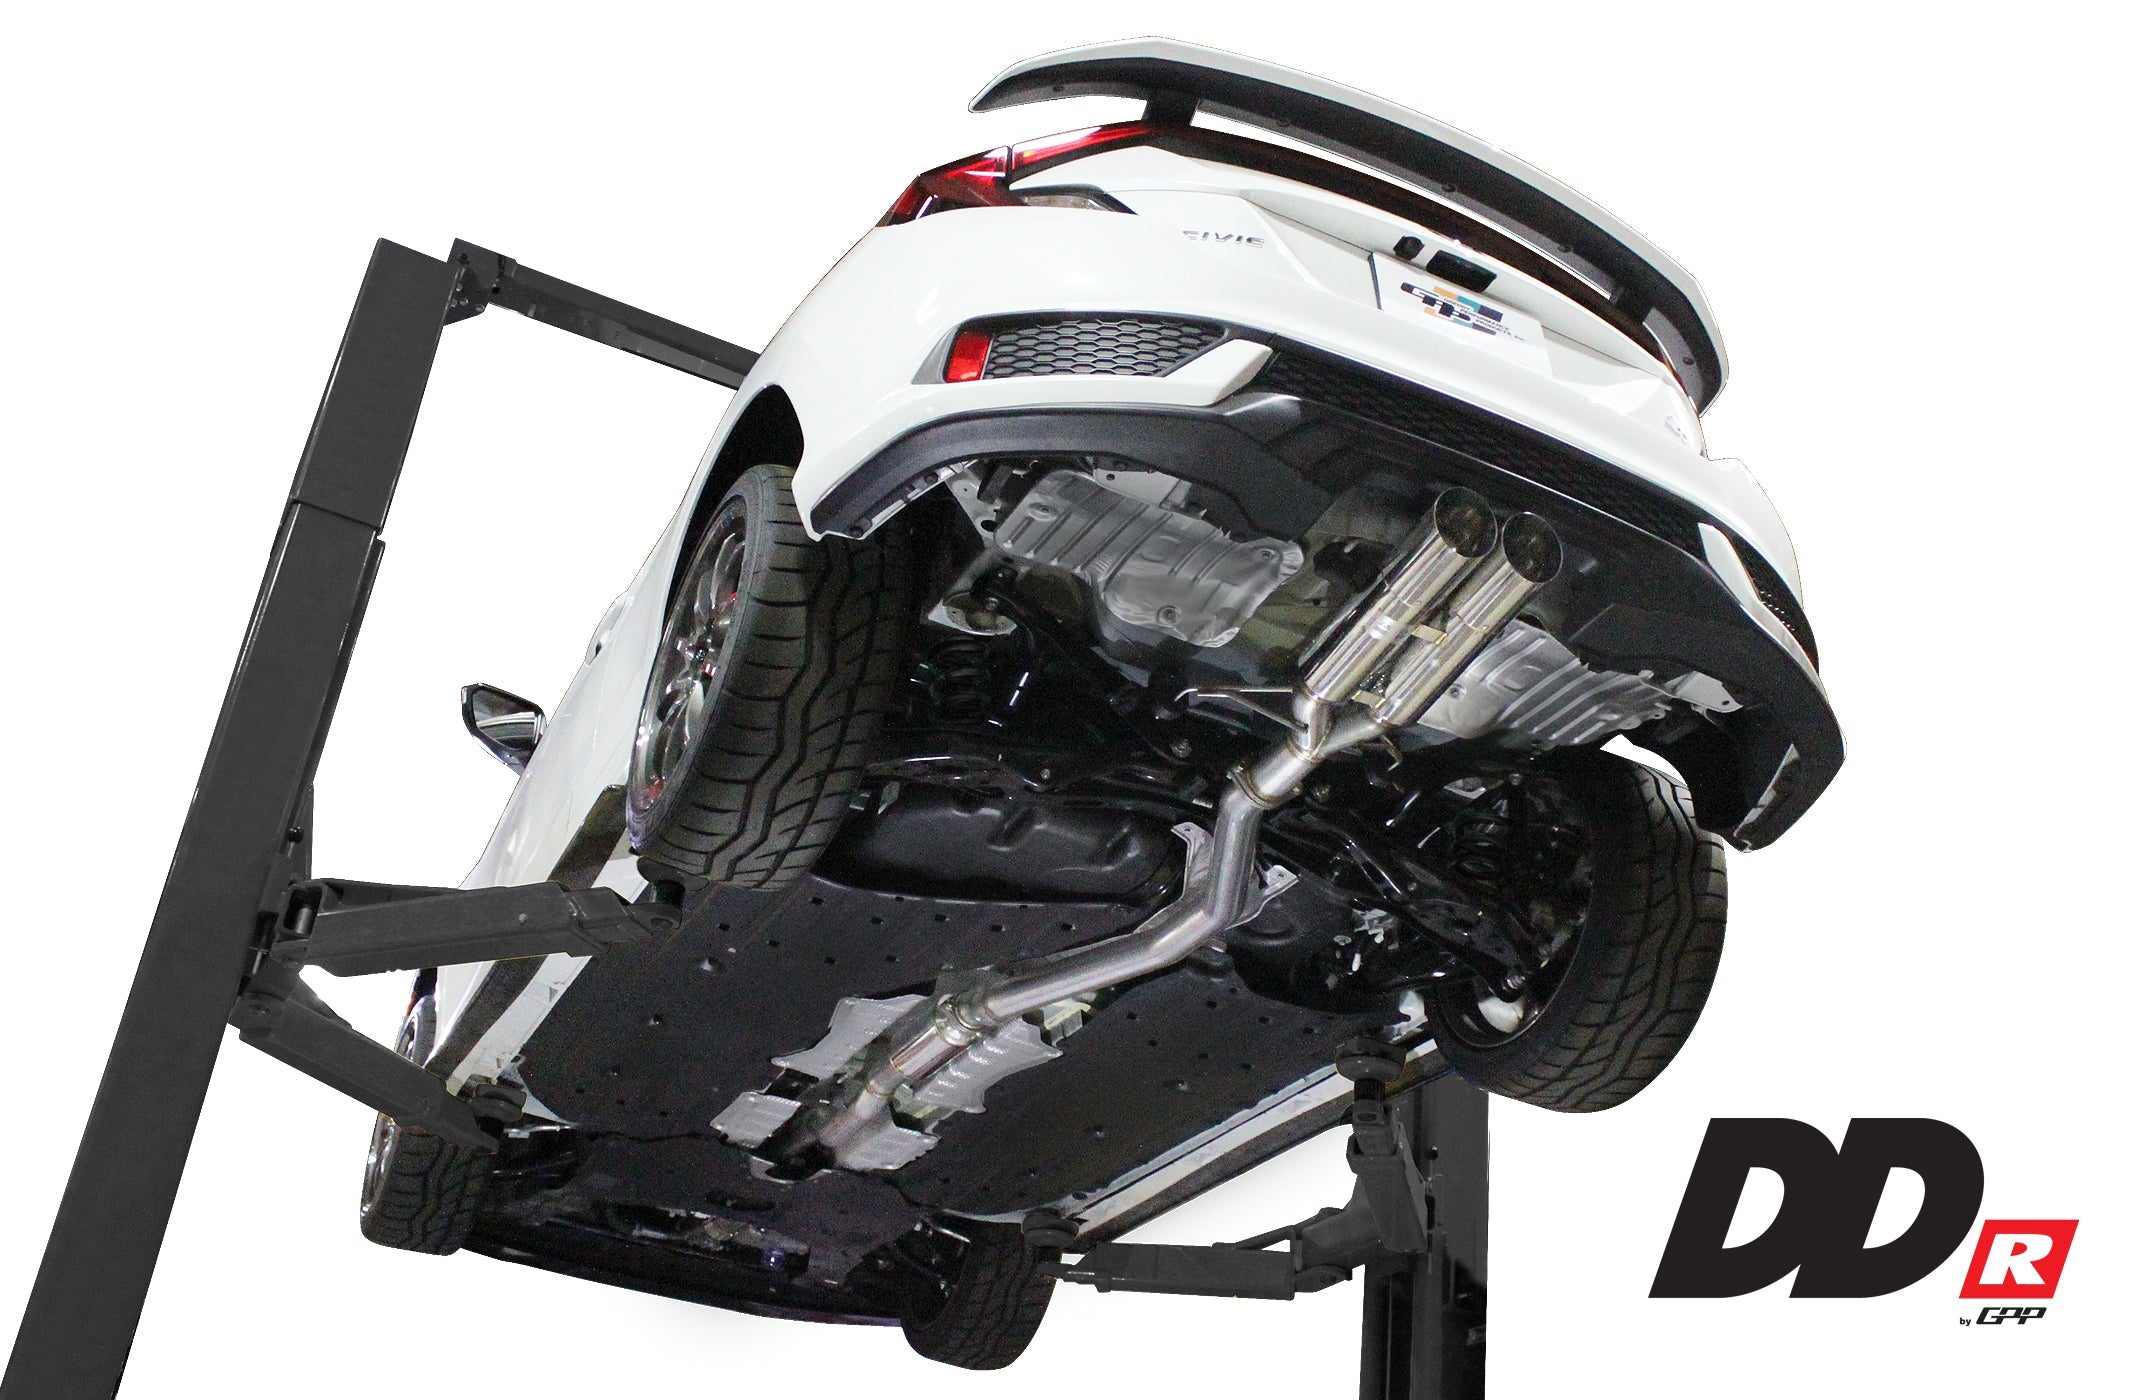 GPP DD-R Exhaust Systems - application specific